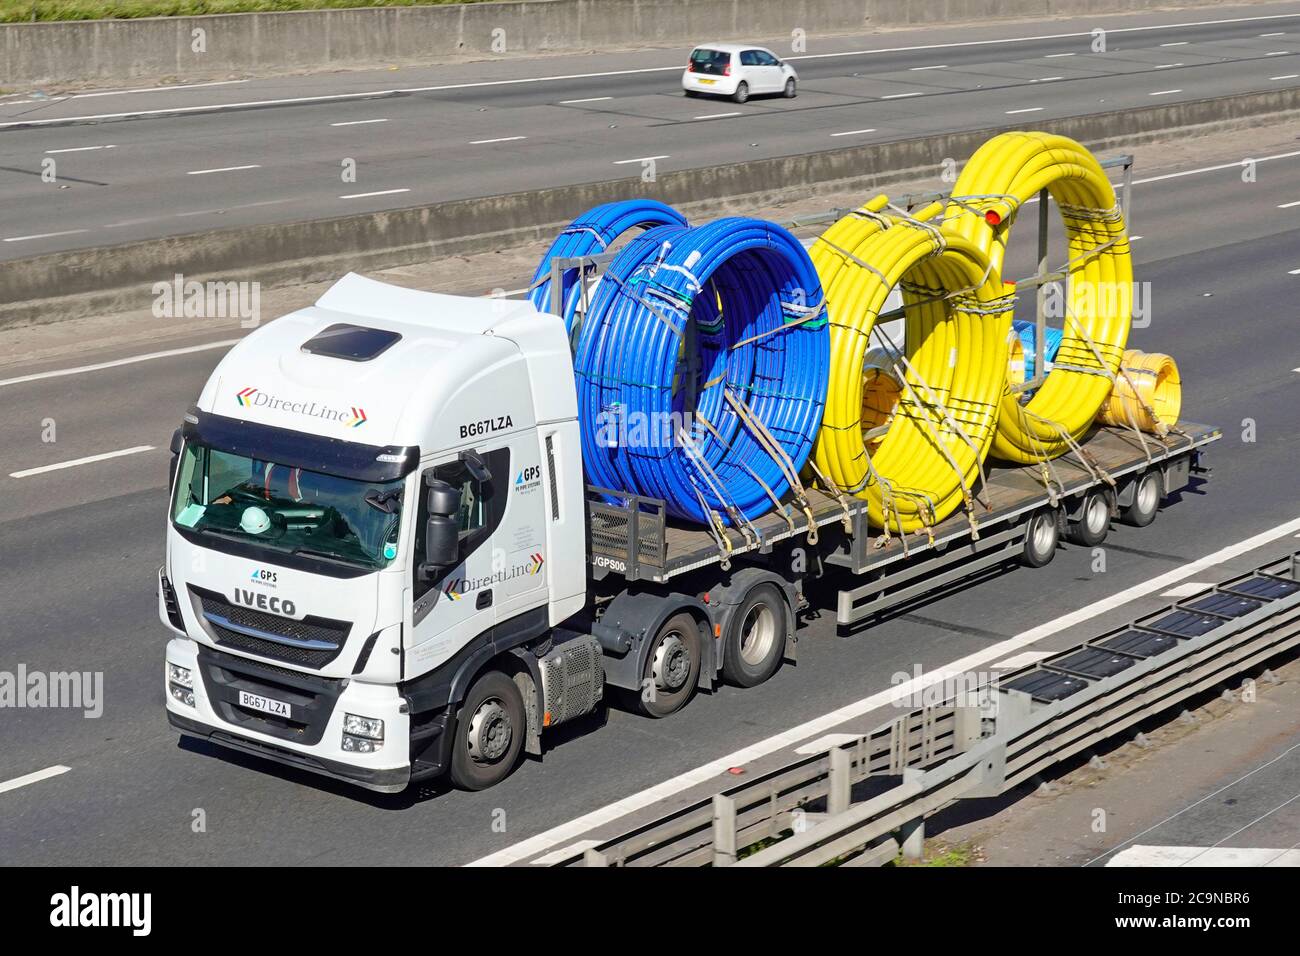 GPS PE plastic pipe business supply chain Iveco hgv lorry truck & low loader trailer load of coil yellow gas & blue water polyethylene tube England UK Stock Photo